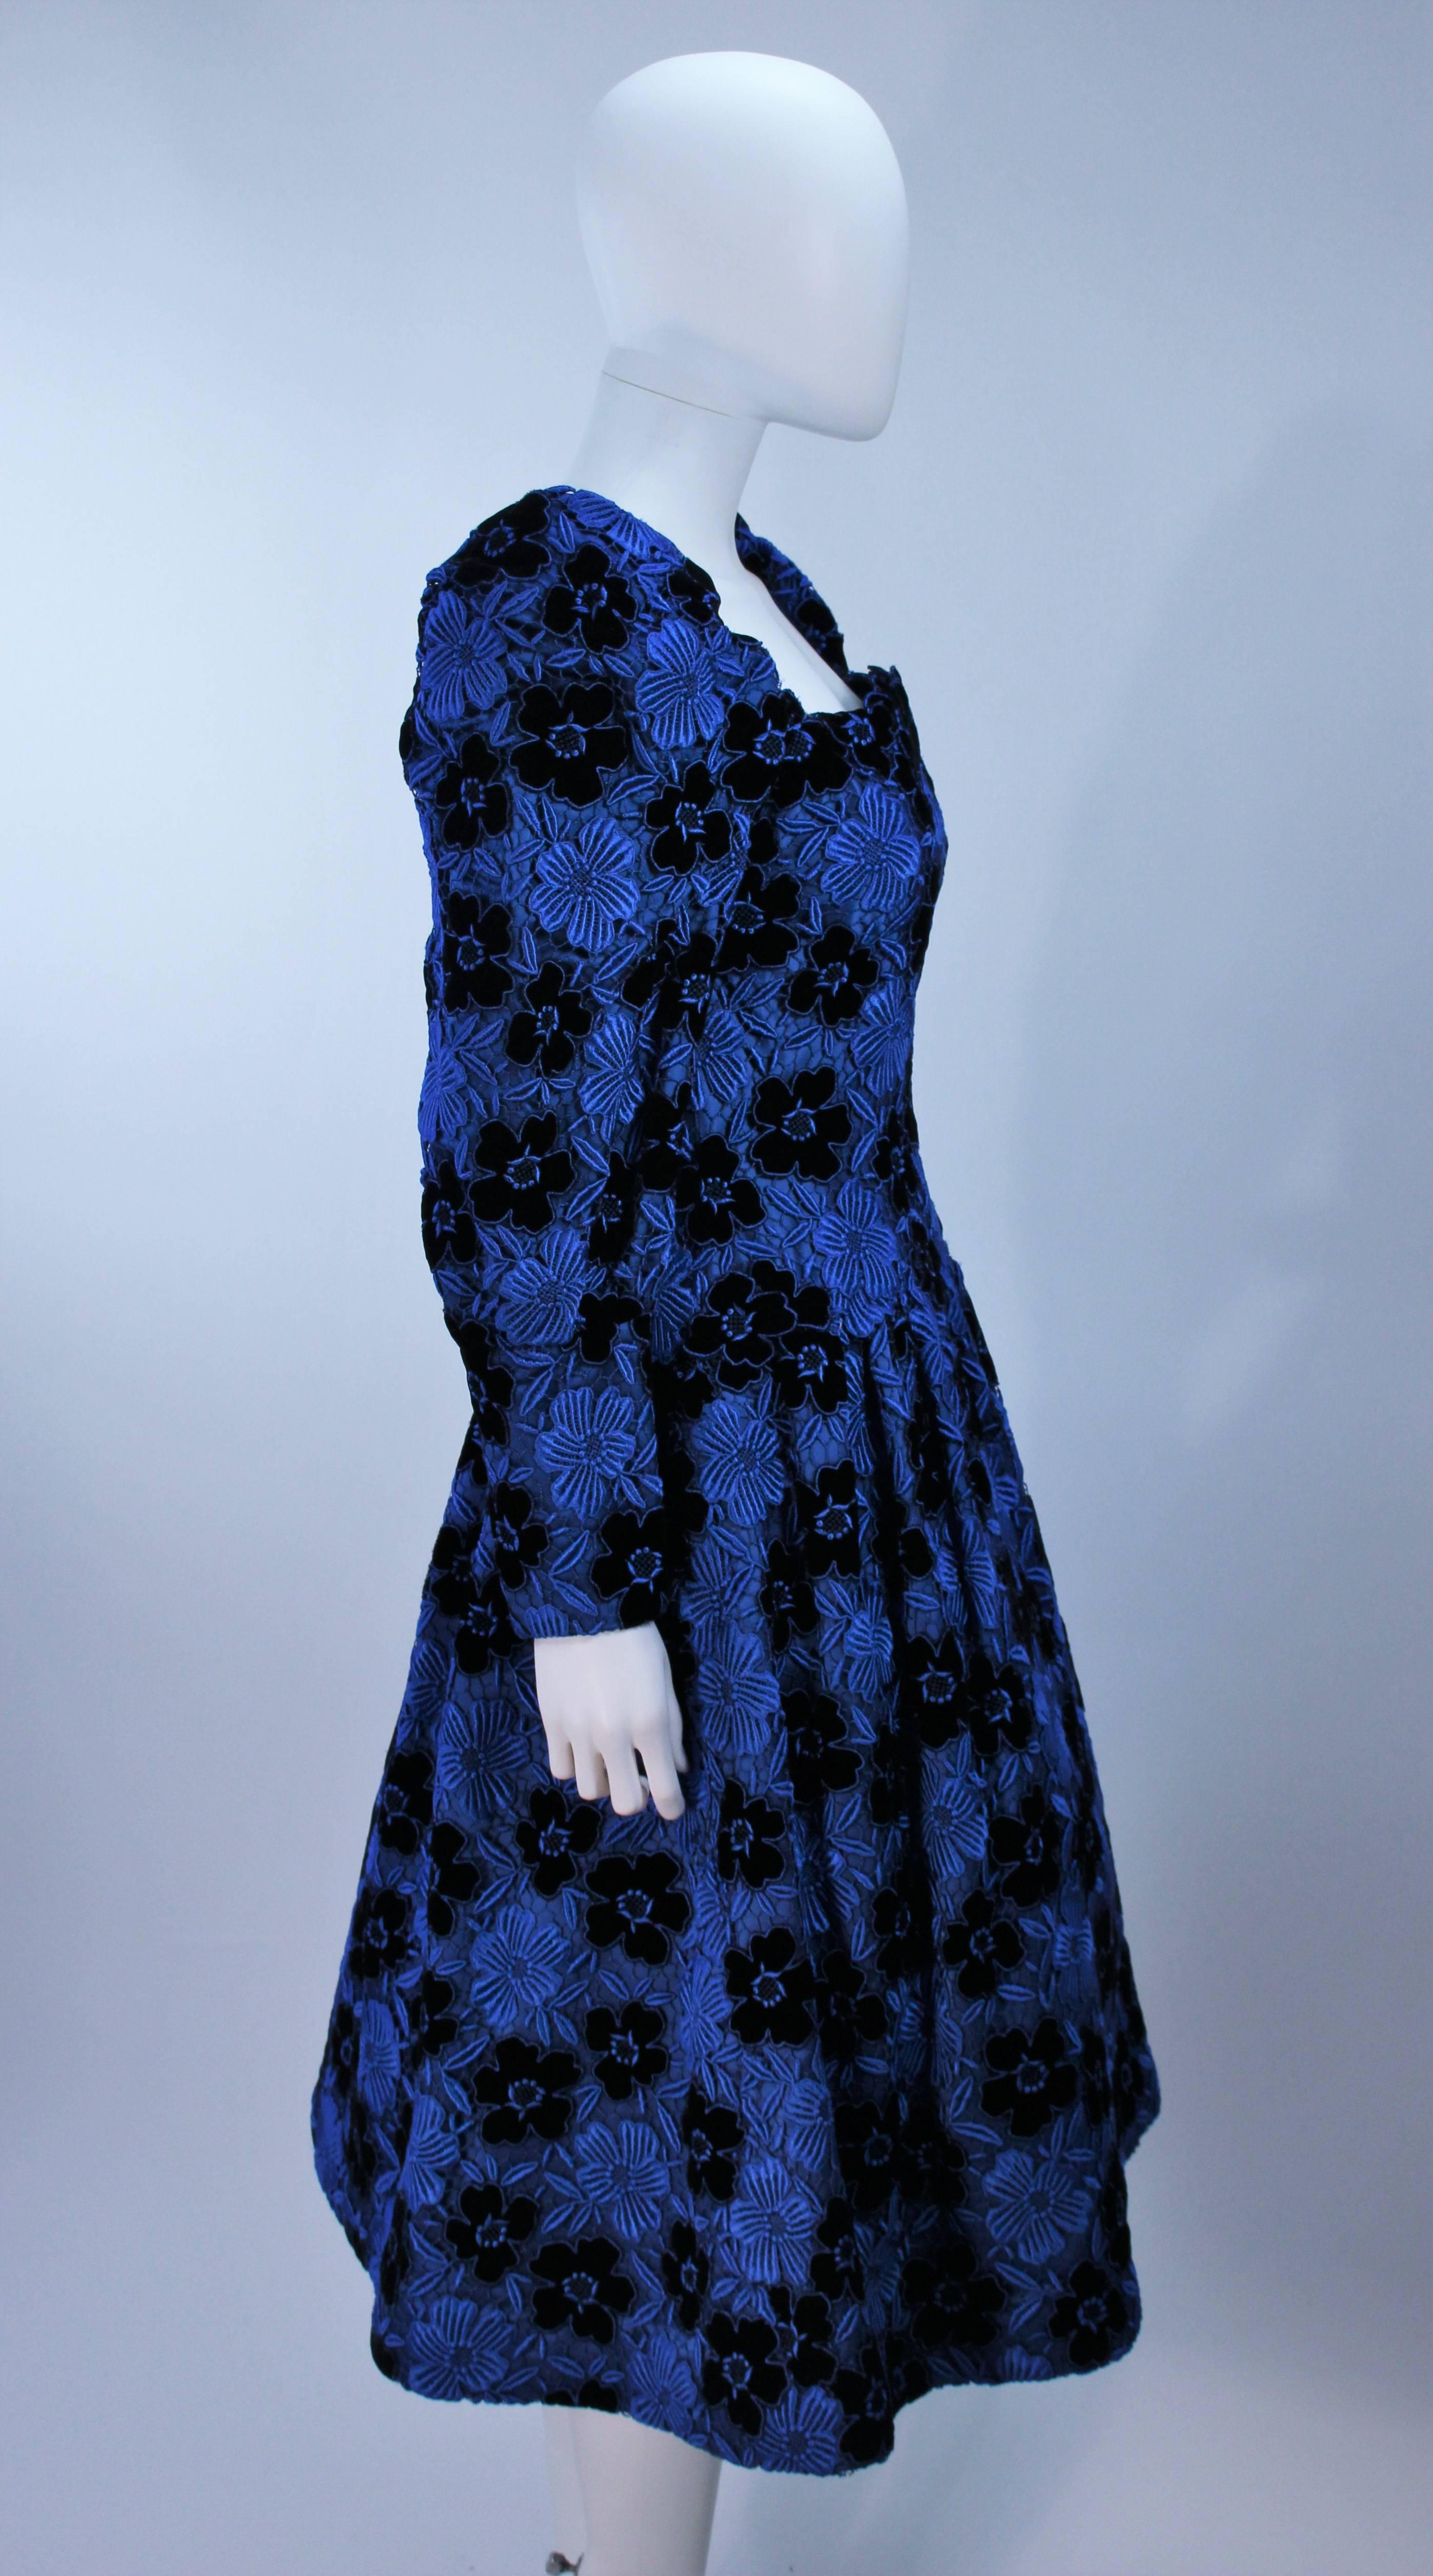 ARNOLD SCAASI Cobalt Blue Evening Dress with Floral Pattern Size 10-12 3